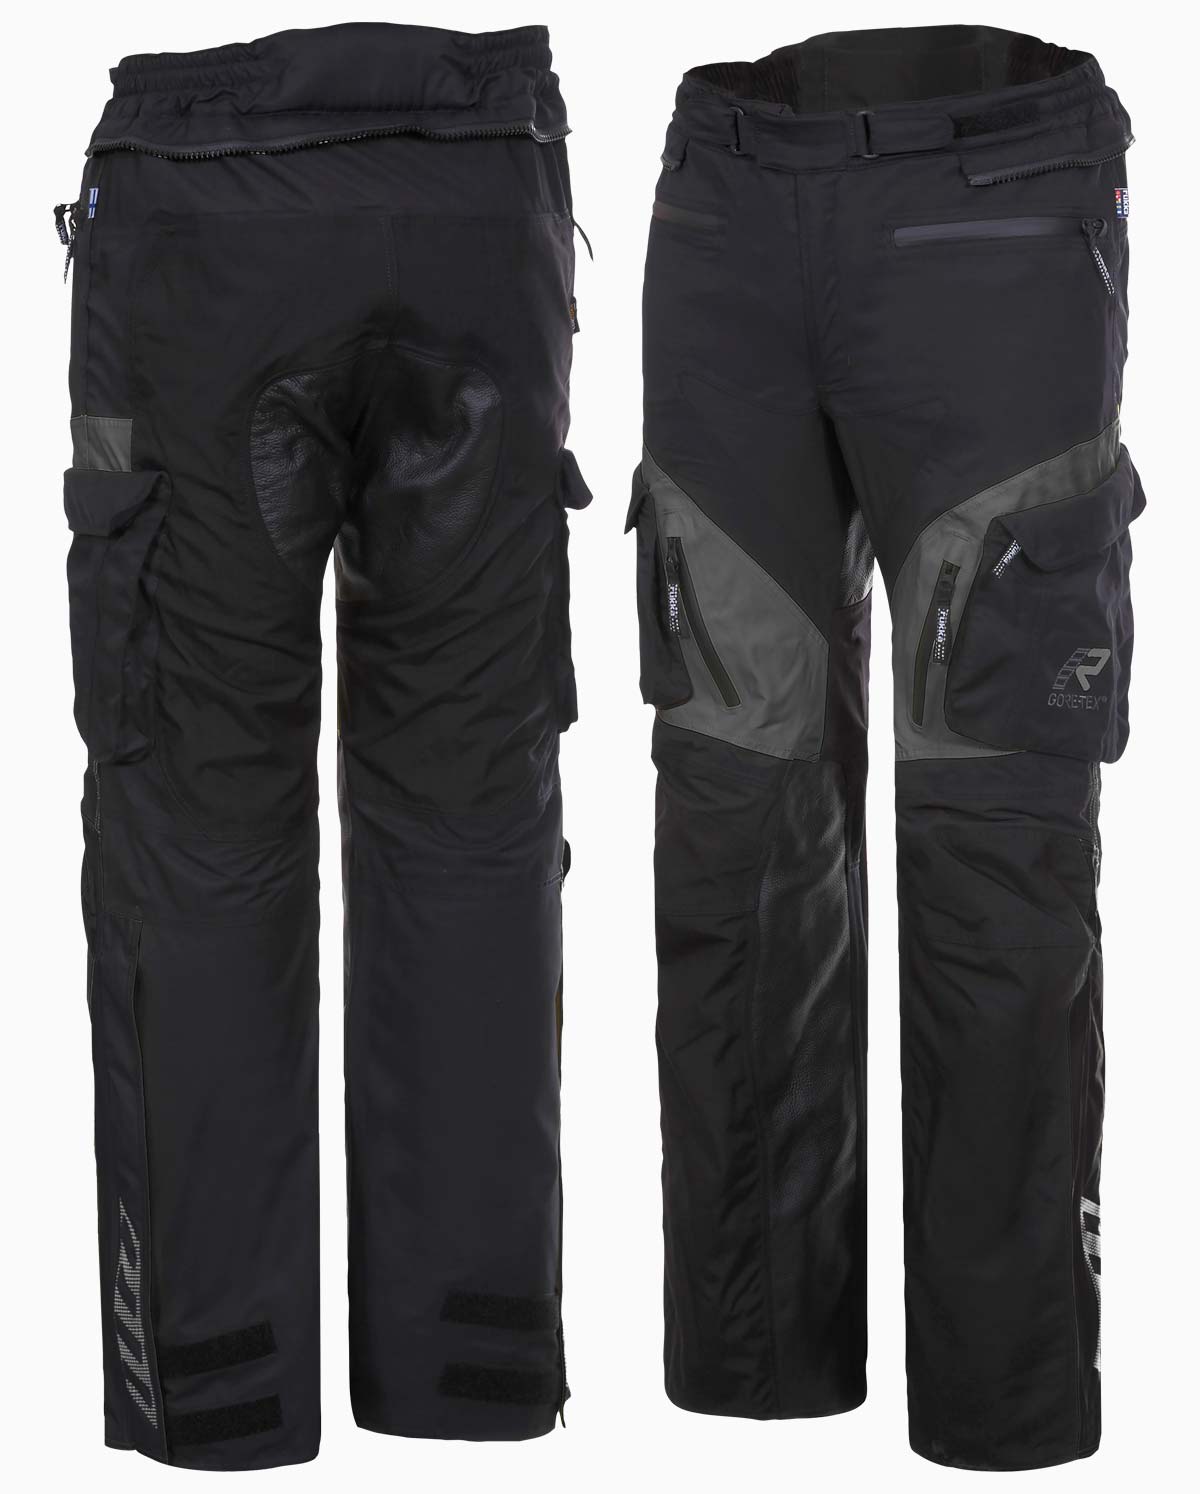 Rukka Overpass pant product images